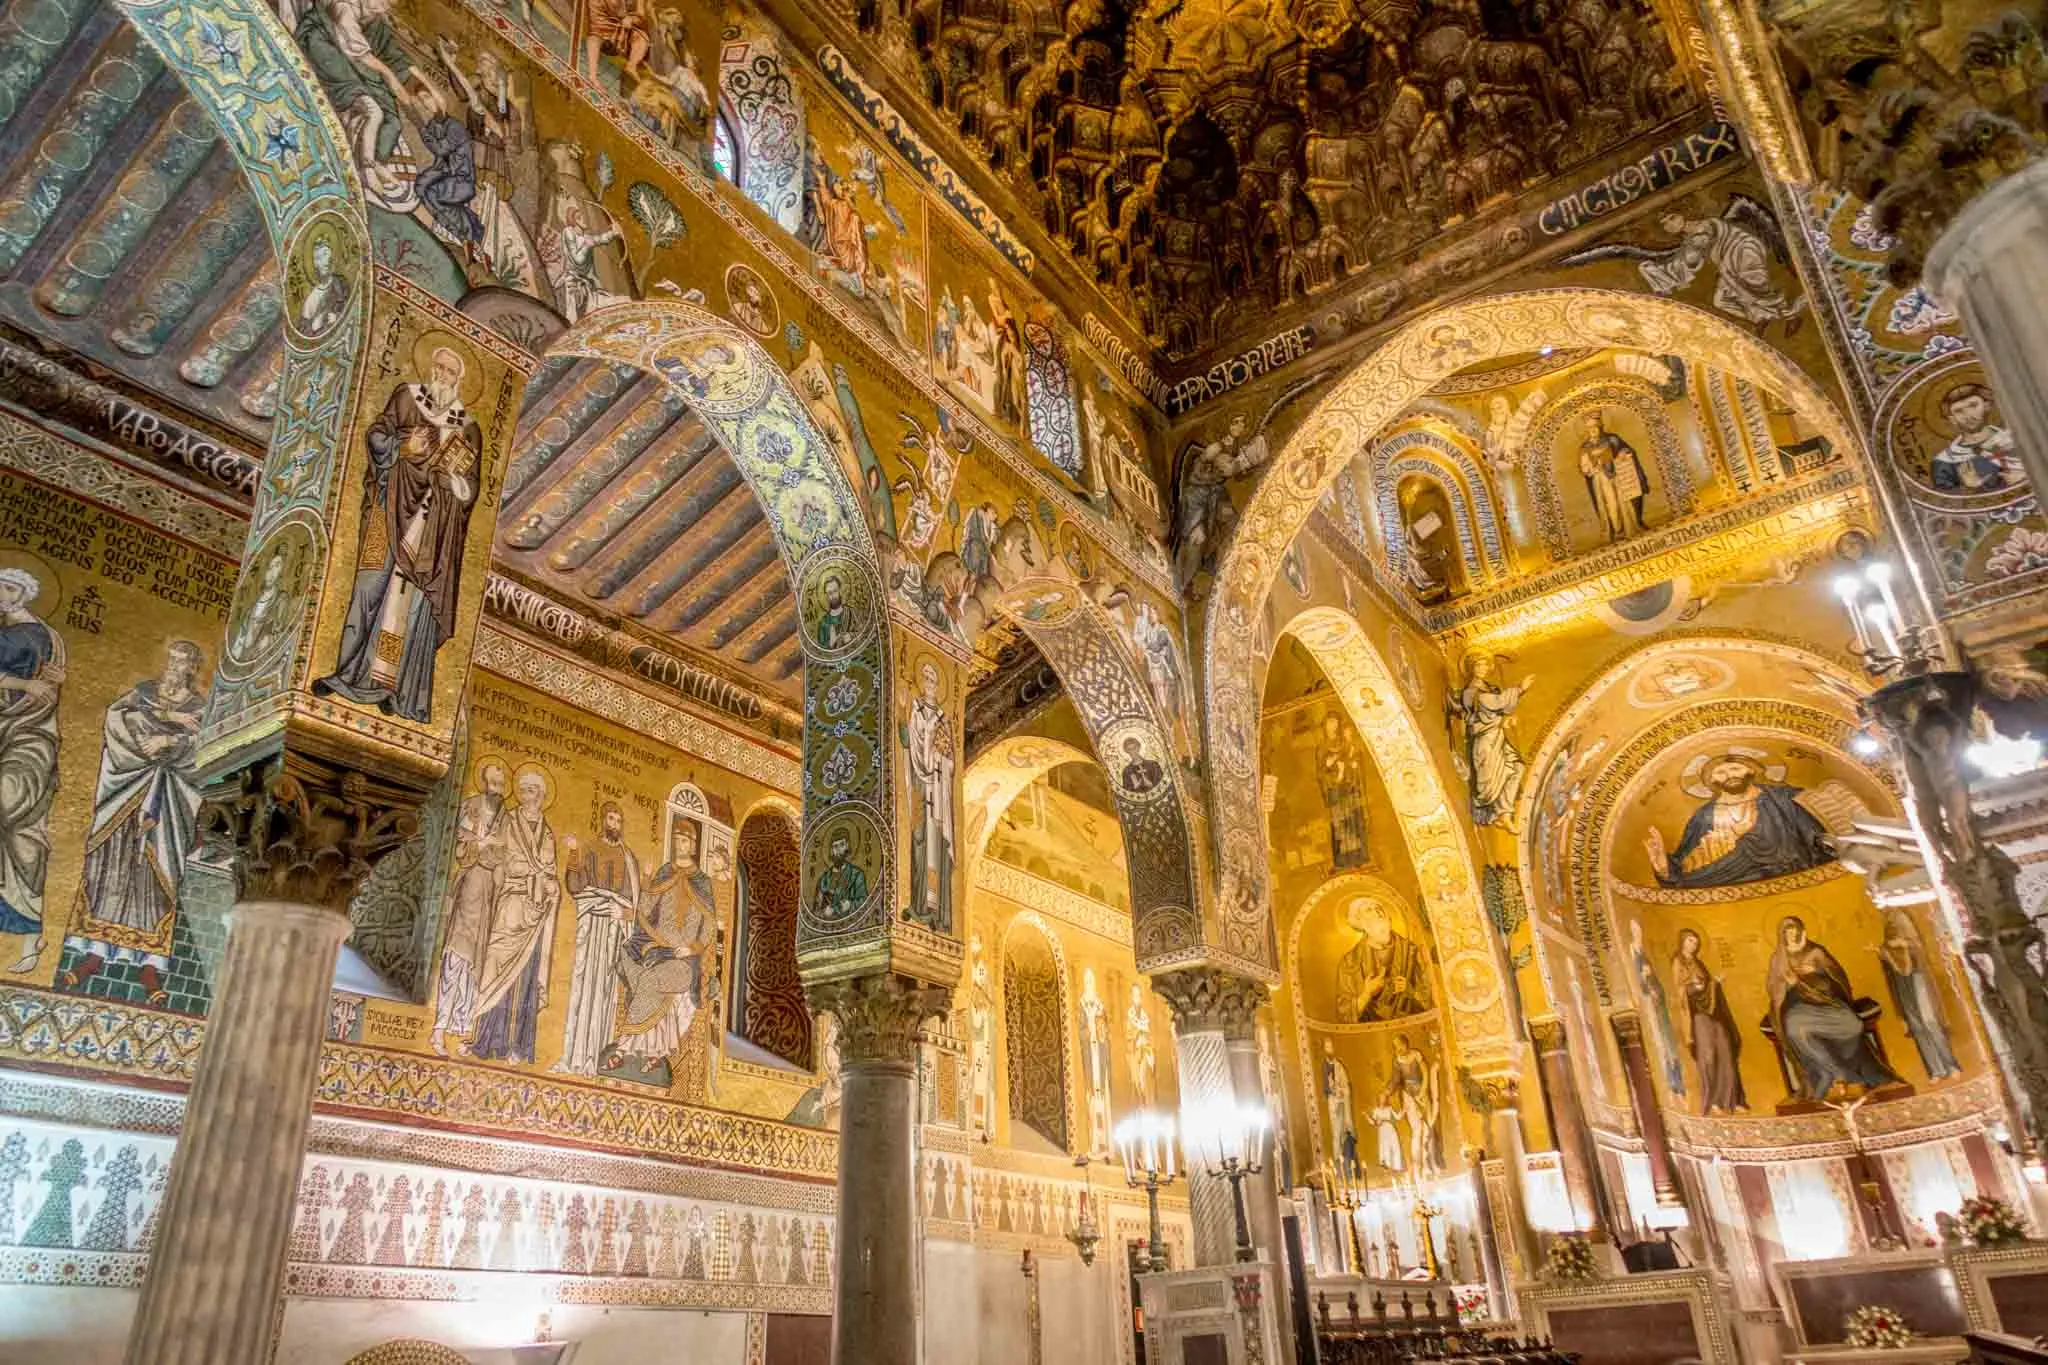 Wondering what to do in Palermo? Pay a visit to the Palatine Chapel